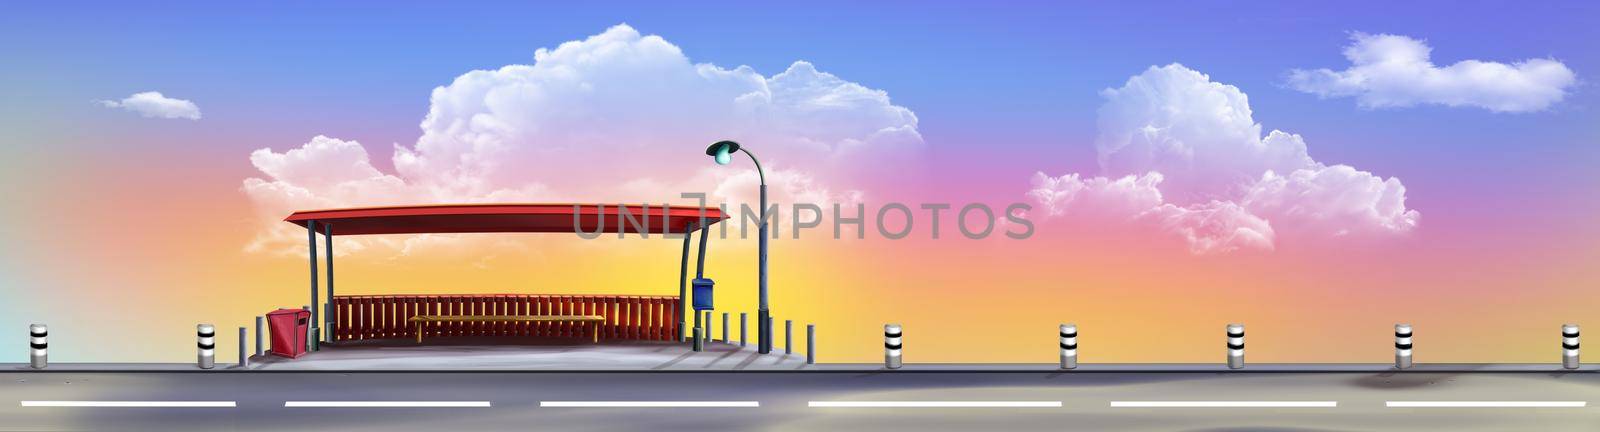 Bus stop on a Suburban highway on a sunny morning. Digital Painting Background, Illustration.